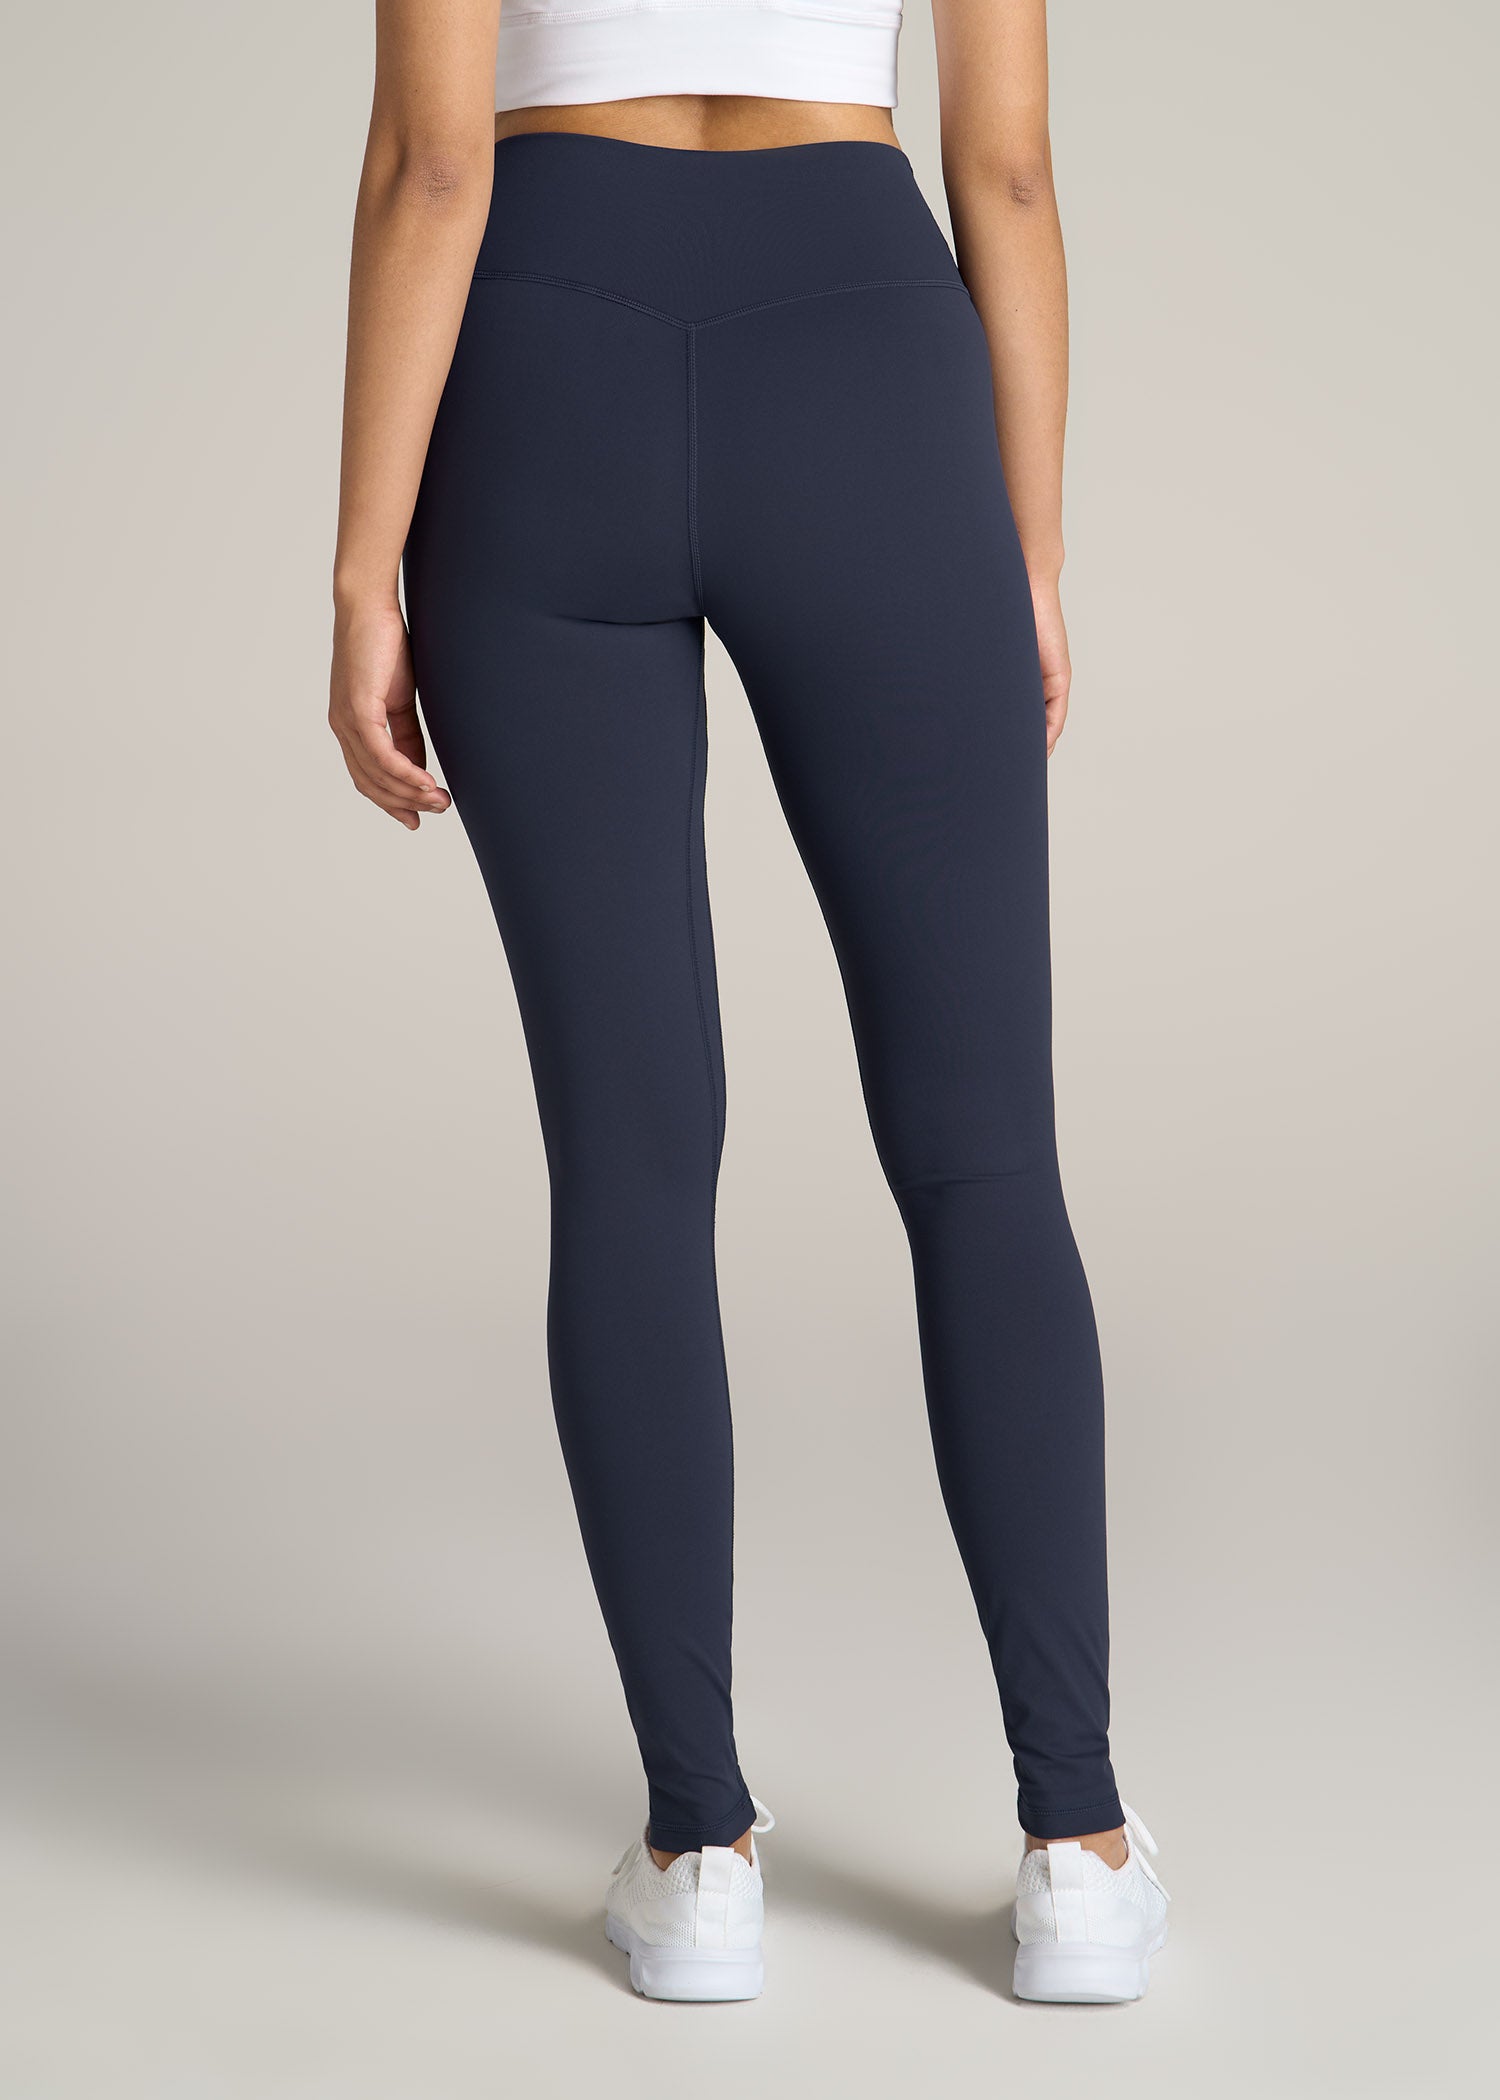 Playback high-rise leggings in blue - The Upside